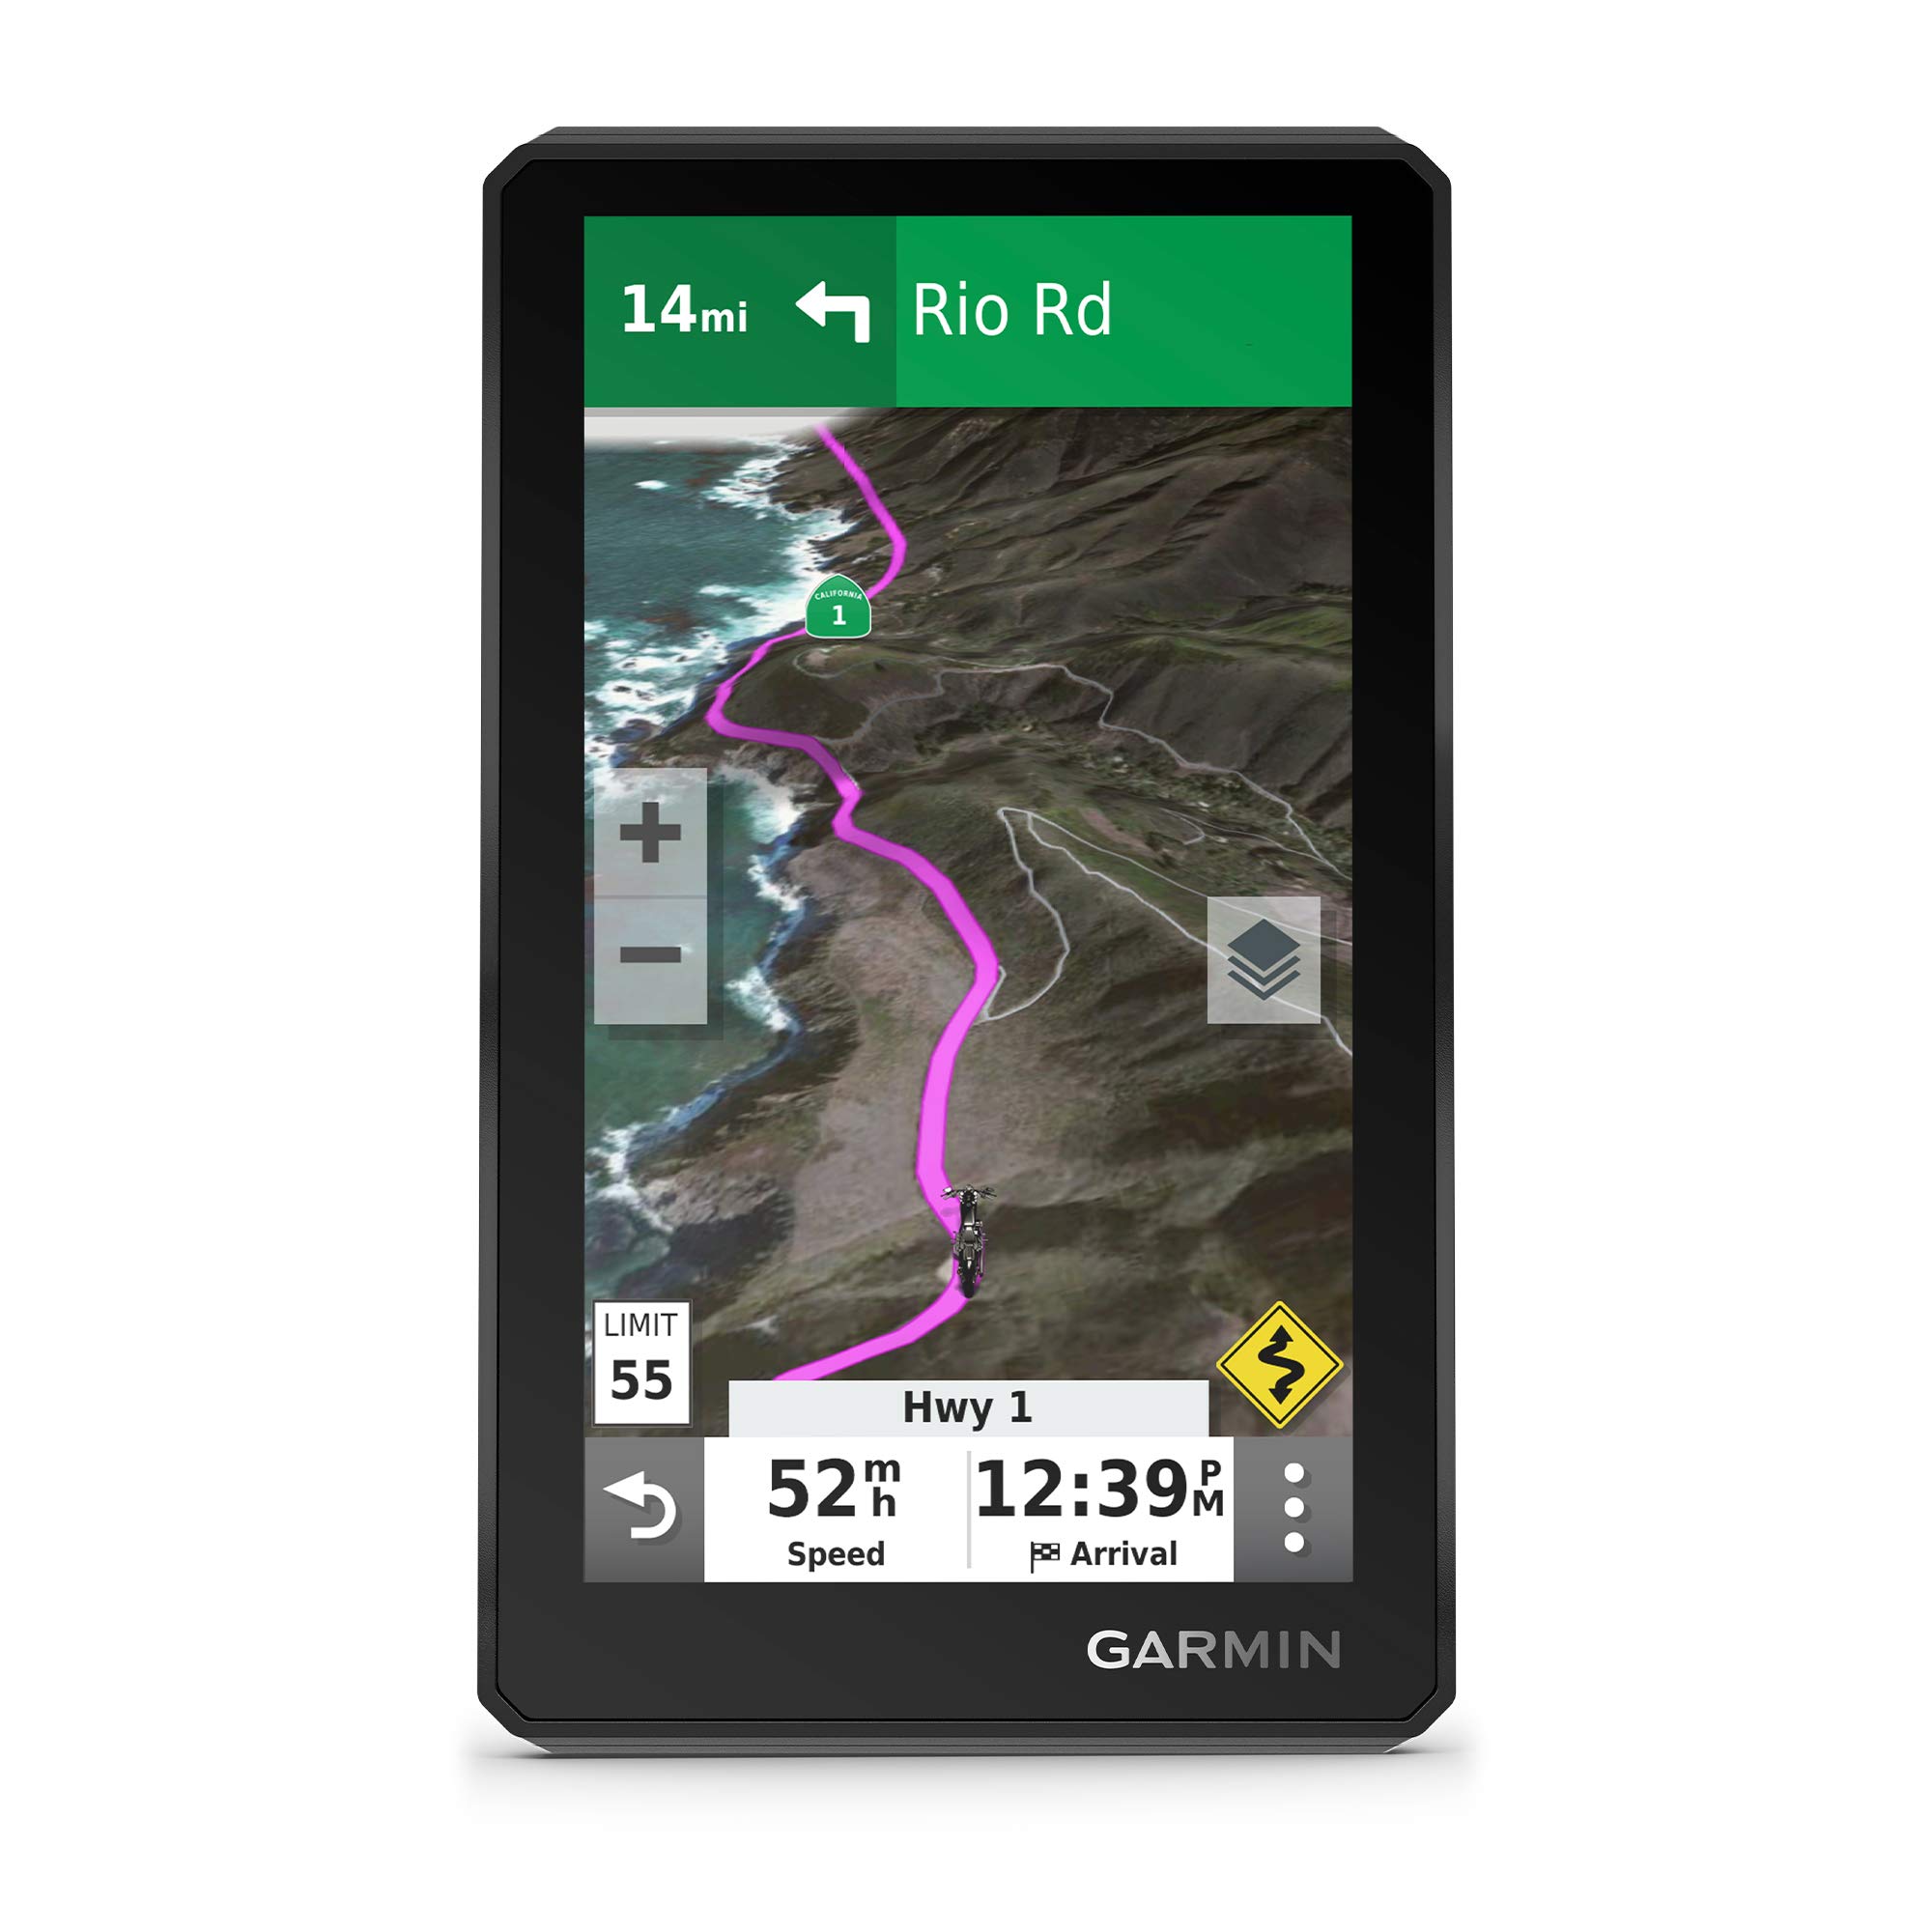 Garmin zūmo XT, All-Terrain Motorcycle GPS Navigation Device, 5.5-inch Ultrabright and Rain-Resistant Display & Carrying Case 5.5 inches